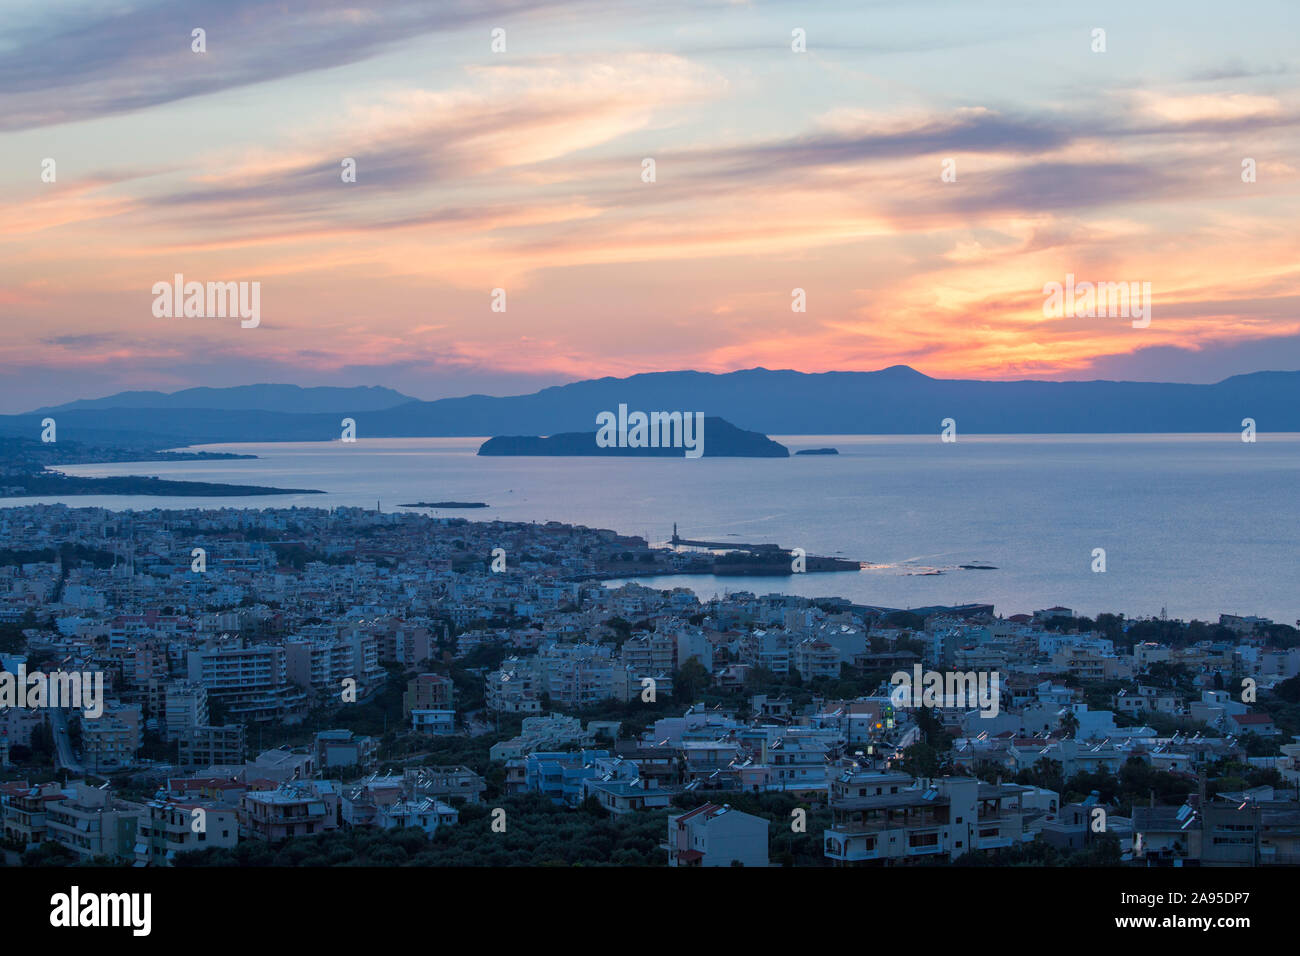 Chania, Crete, Greece. View over the city and Gulf of Chania at sunset, the island of Agii Theodori prominent. Stock Photo